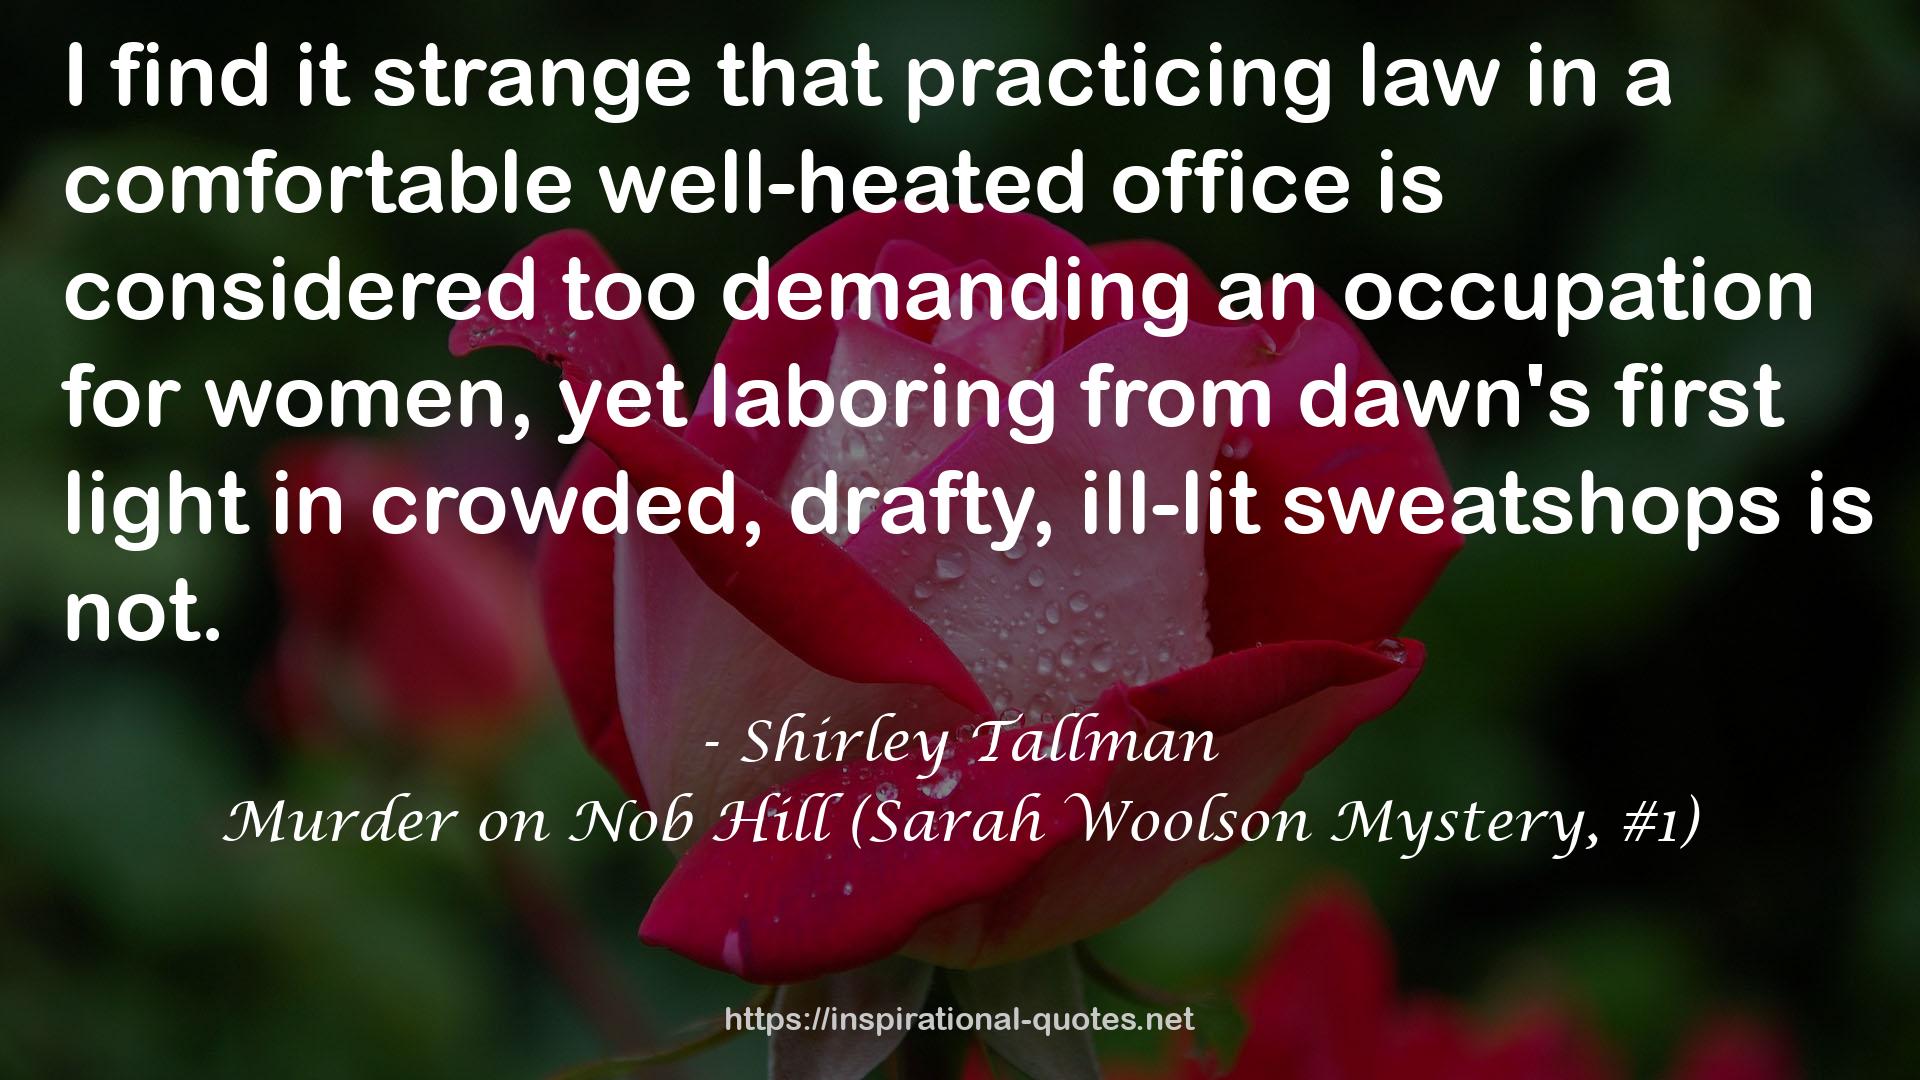 Murder on Nob Hill (Sarah Woolson Mystery, #1) QUOTES